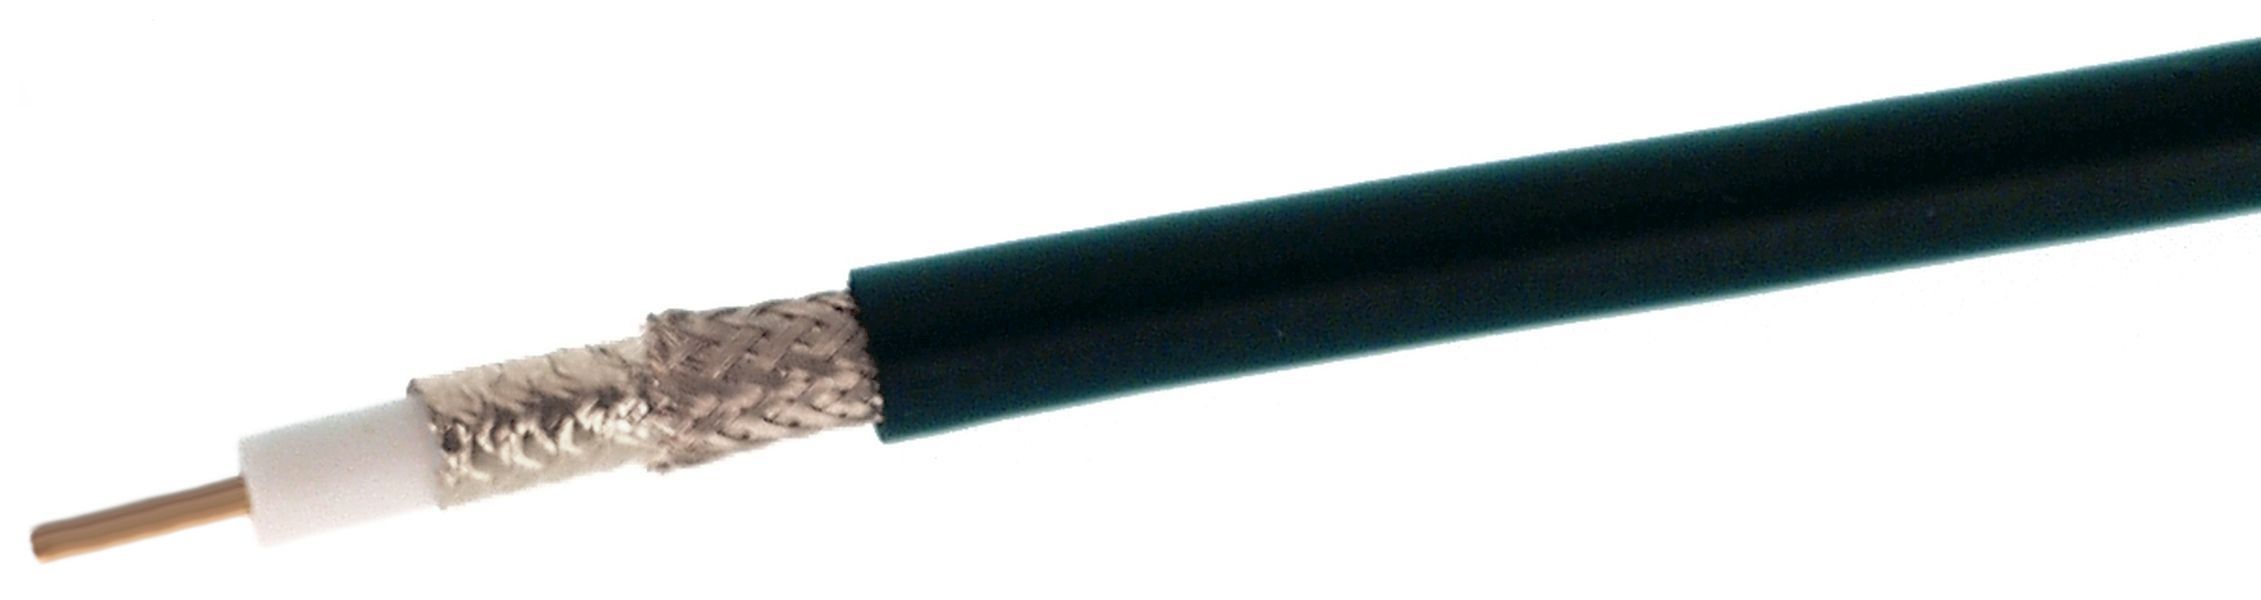 H2005 LOW LOSS - antenna cable, 50 ohms, 5 mm